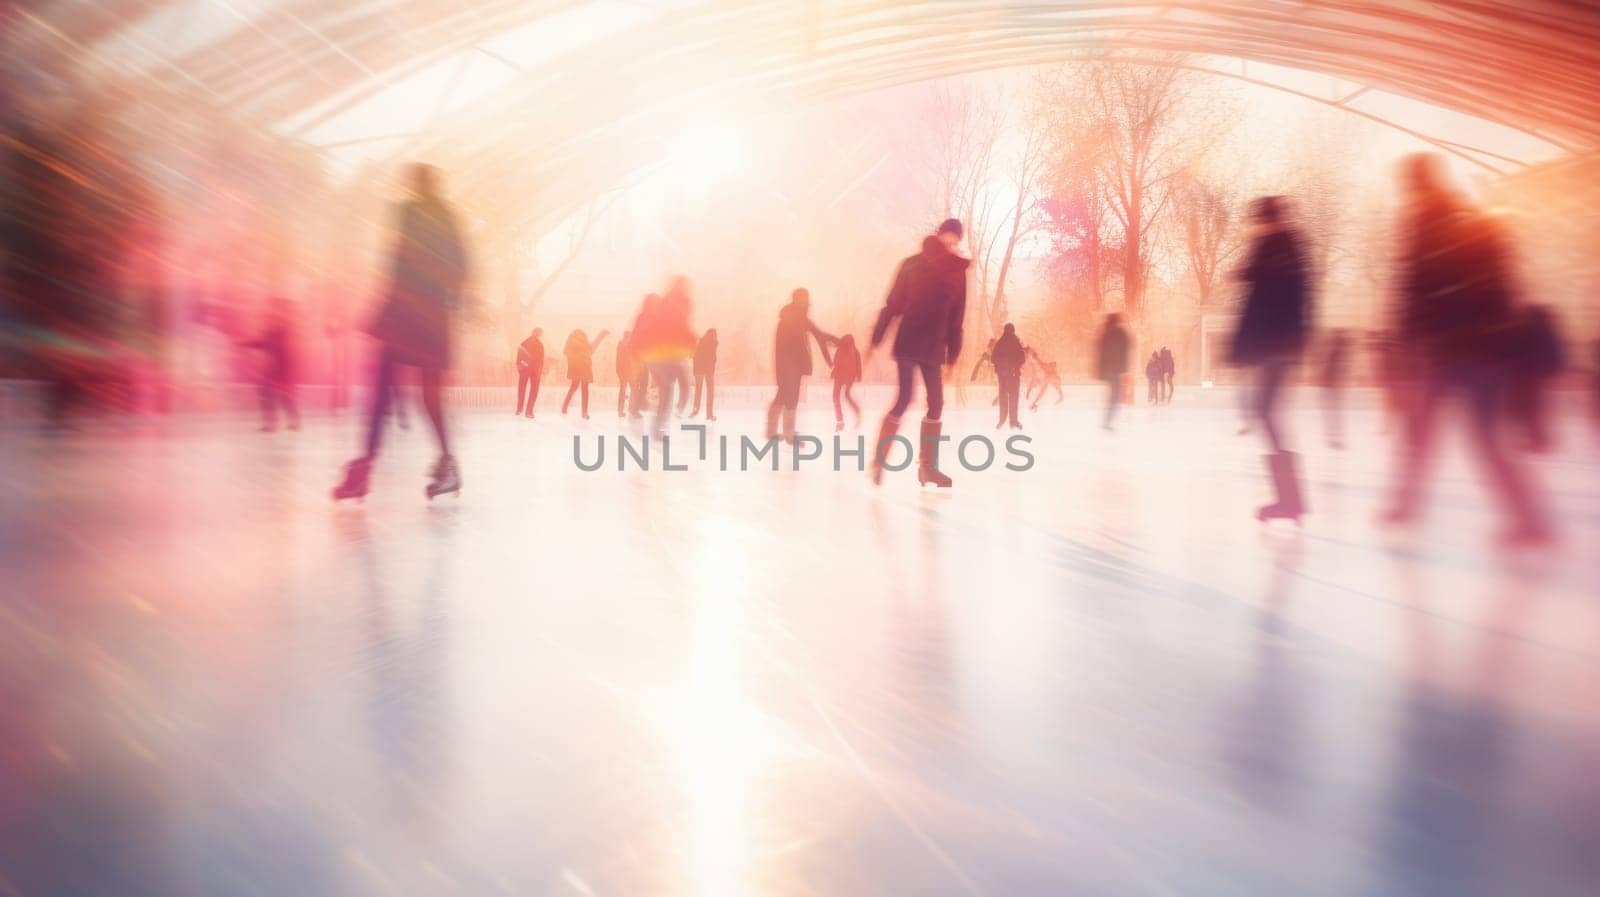 Ice skating rink in winter. Happy moments spent together. Blurred background by natali_brill